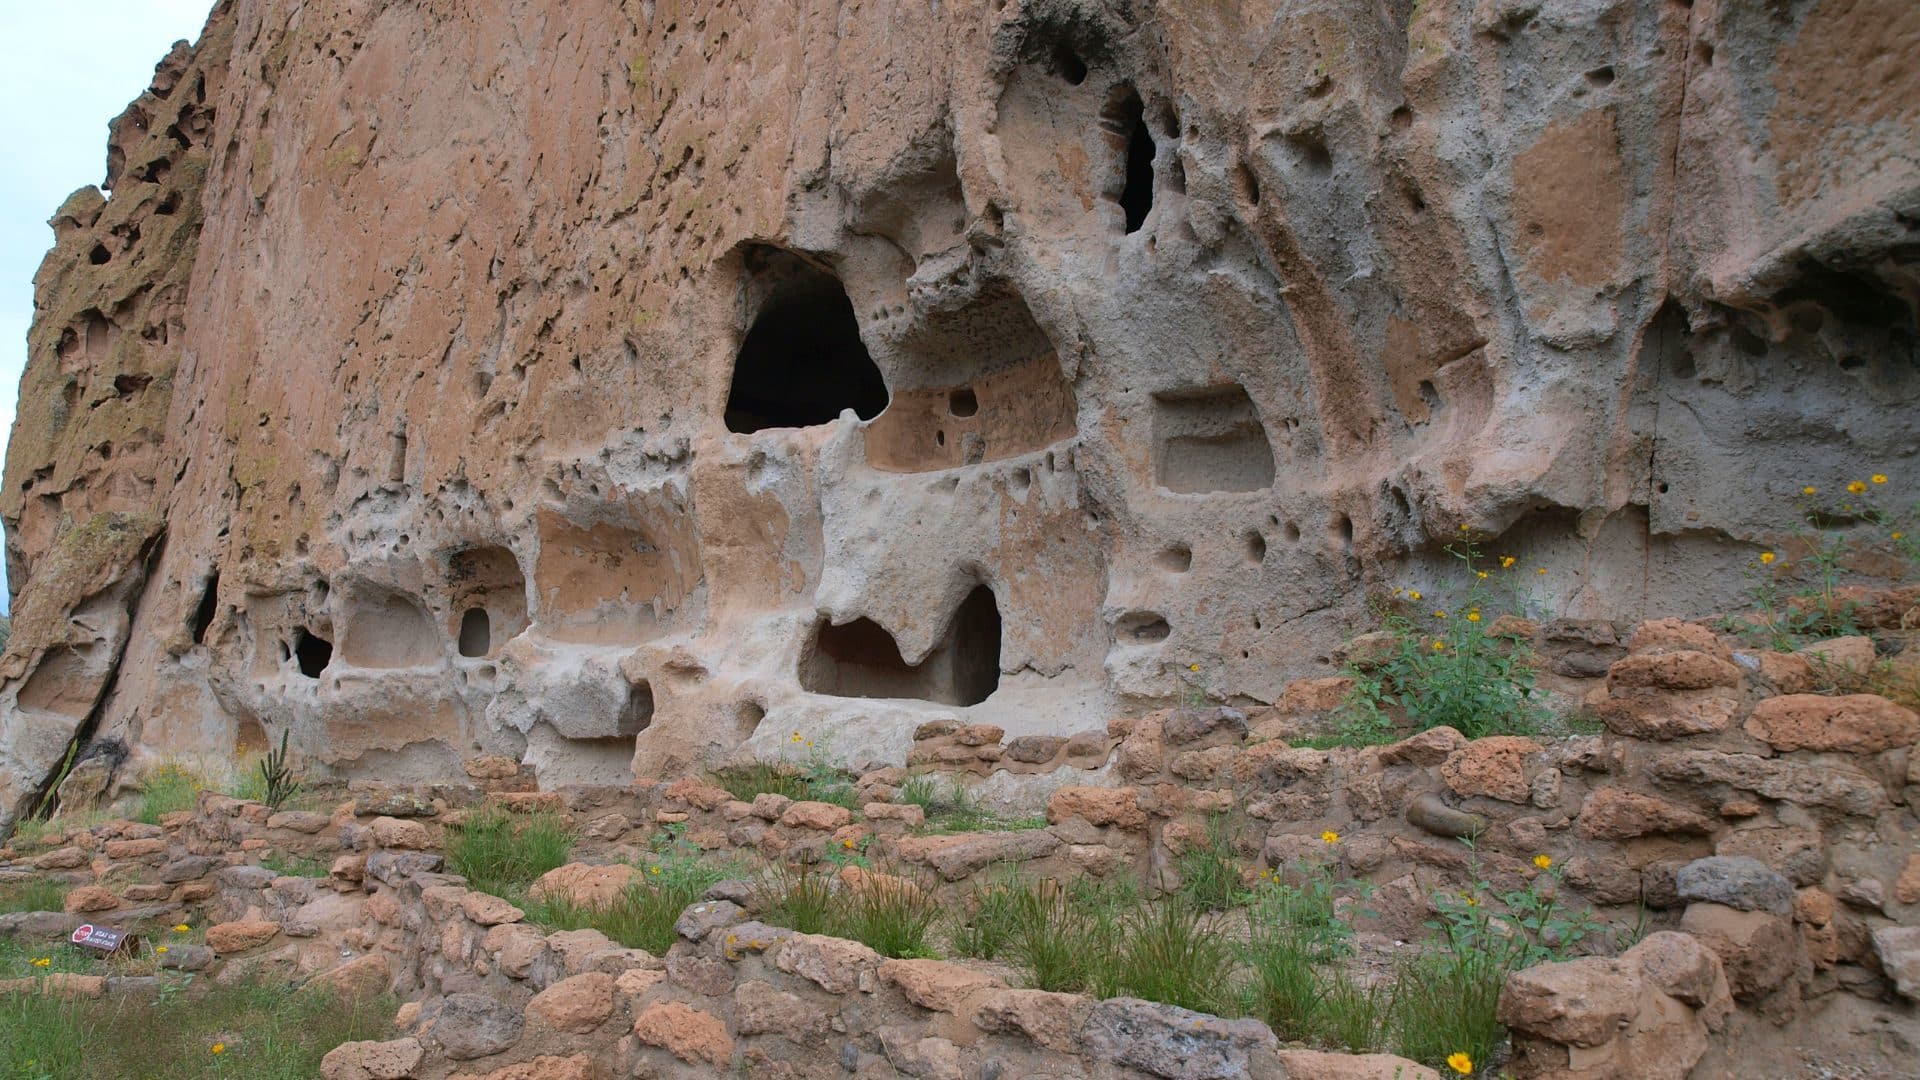 Bandalier National Monument, carved dwellings into the side of a mountain